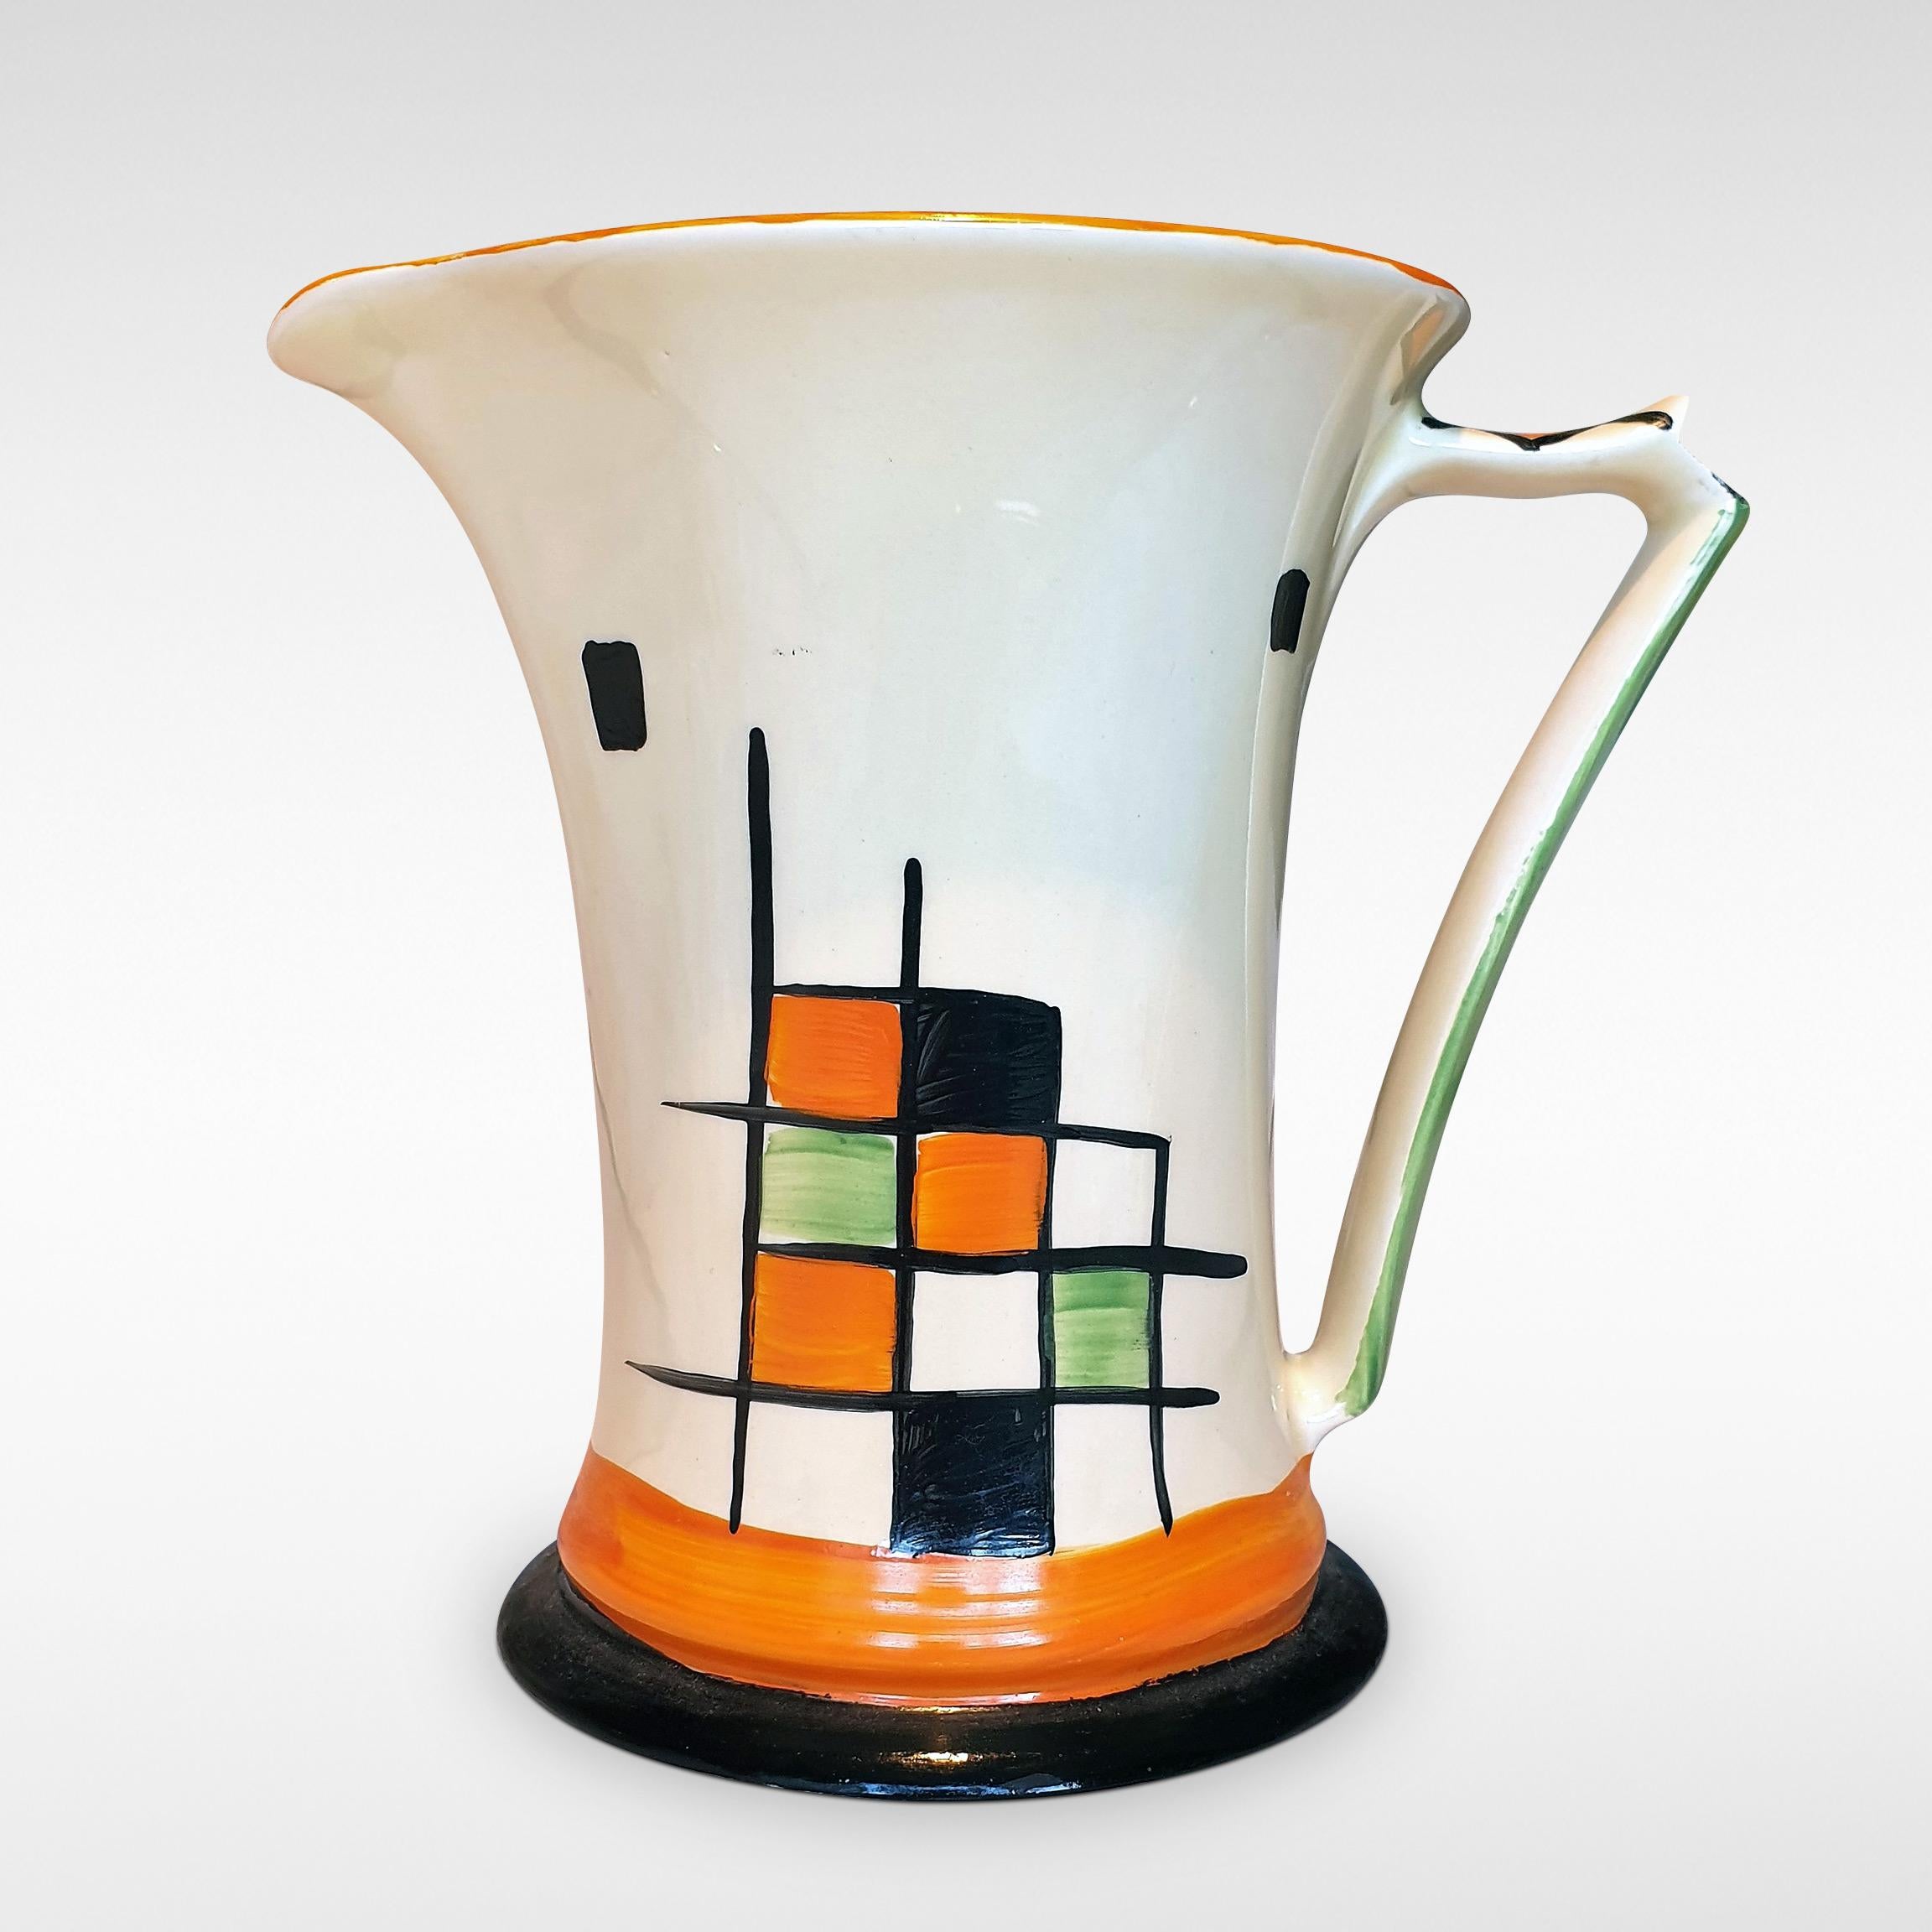 A striking abstract modernist chequerboard design on an Art Deco 'Doric' Jug by Myott, Son & Co. from circa 1937

Myott were one of the smaller Staffordshire pottery forms yet their Modernist and geometric designs of the mid to late 1930s are